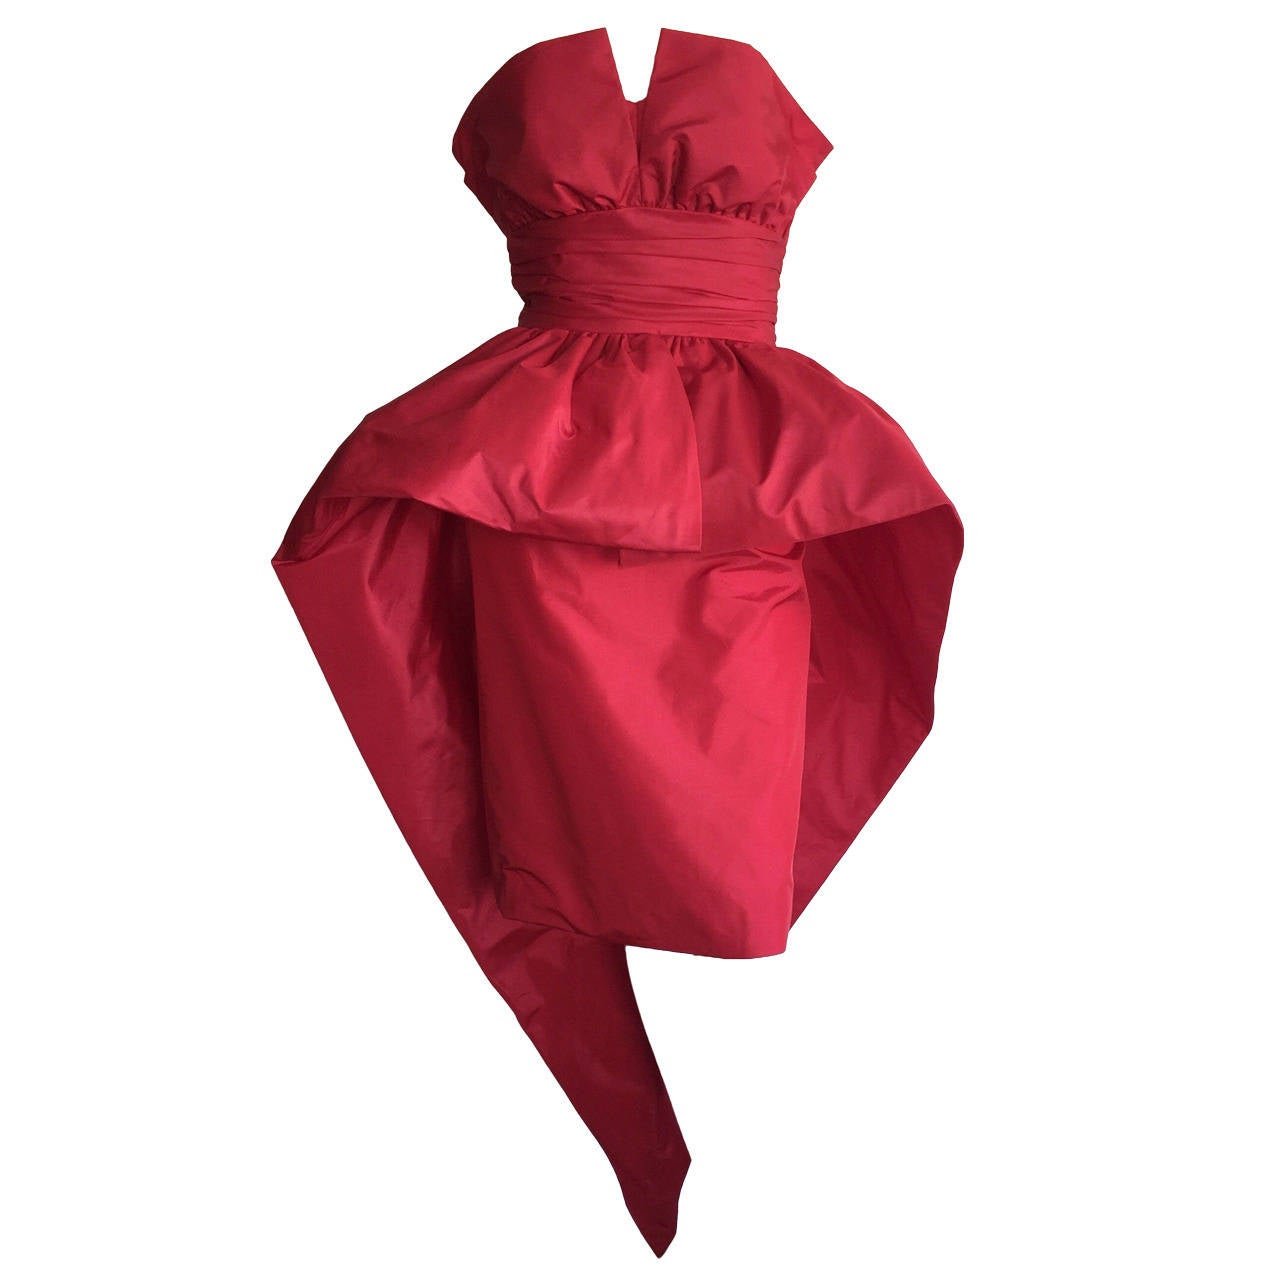 Amazing Avant Garde vintage Victor Costa lipstick red dress! Full Peplum detail at waist, that leads into the severe pointed train. Shelf bodice, that can be worn with the silk lapels pushed down, or left up. A showstopper, that is amazing on the